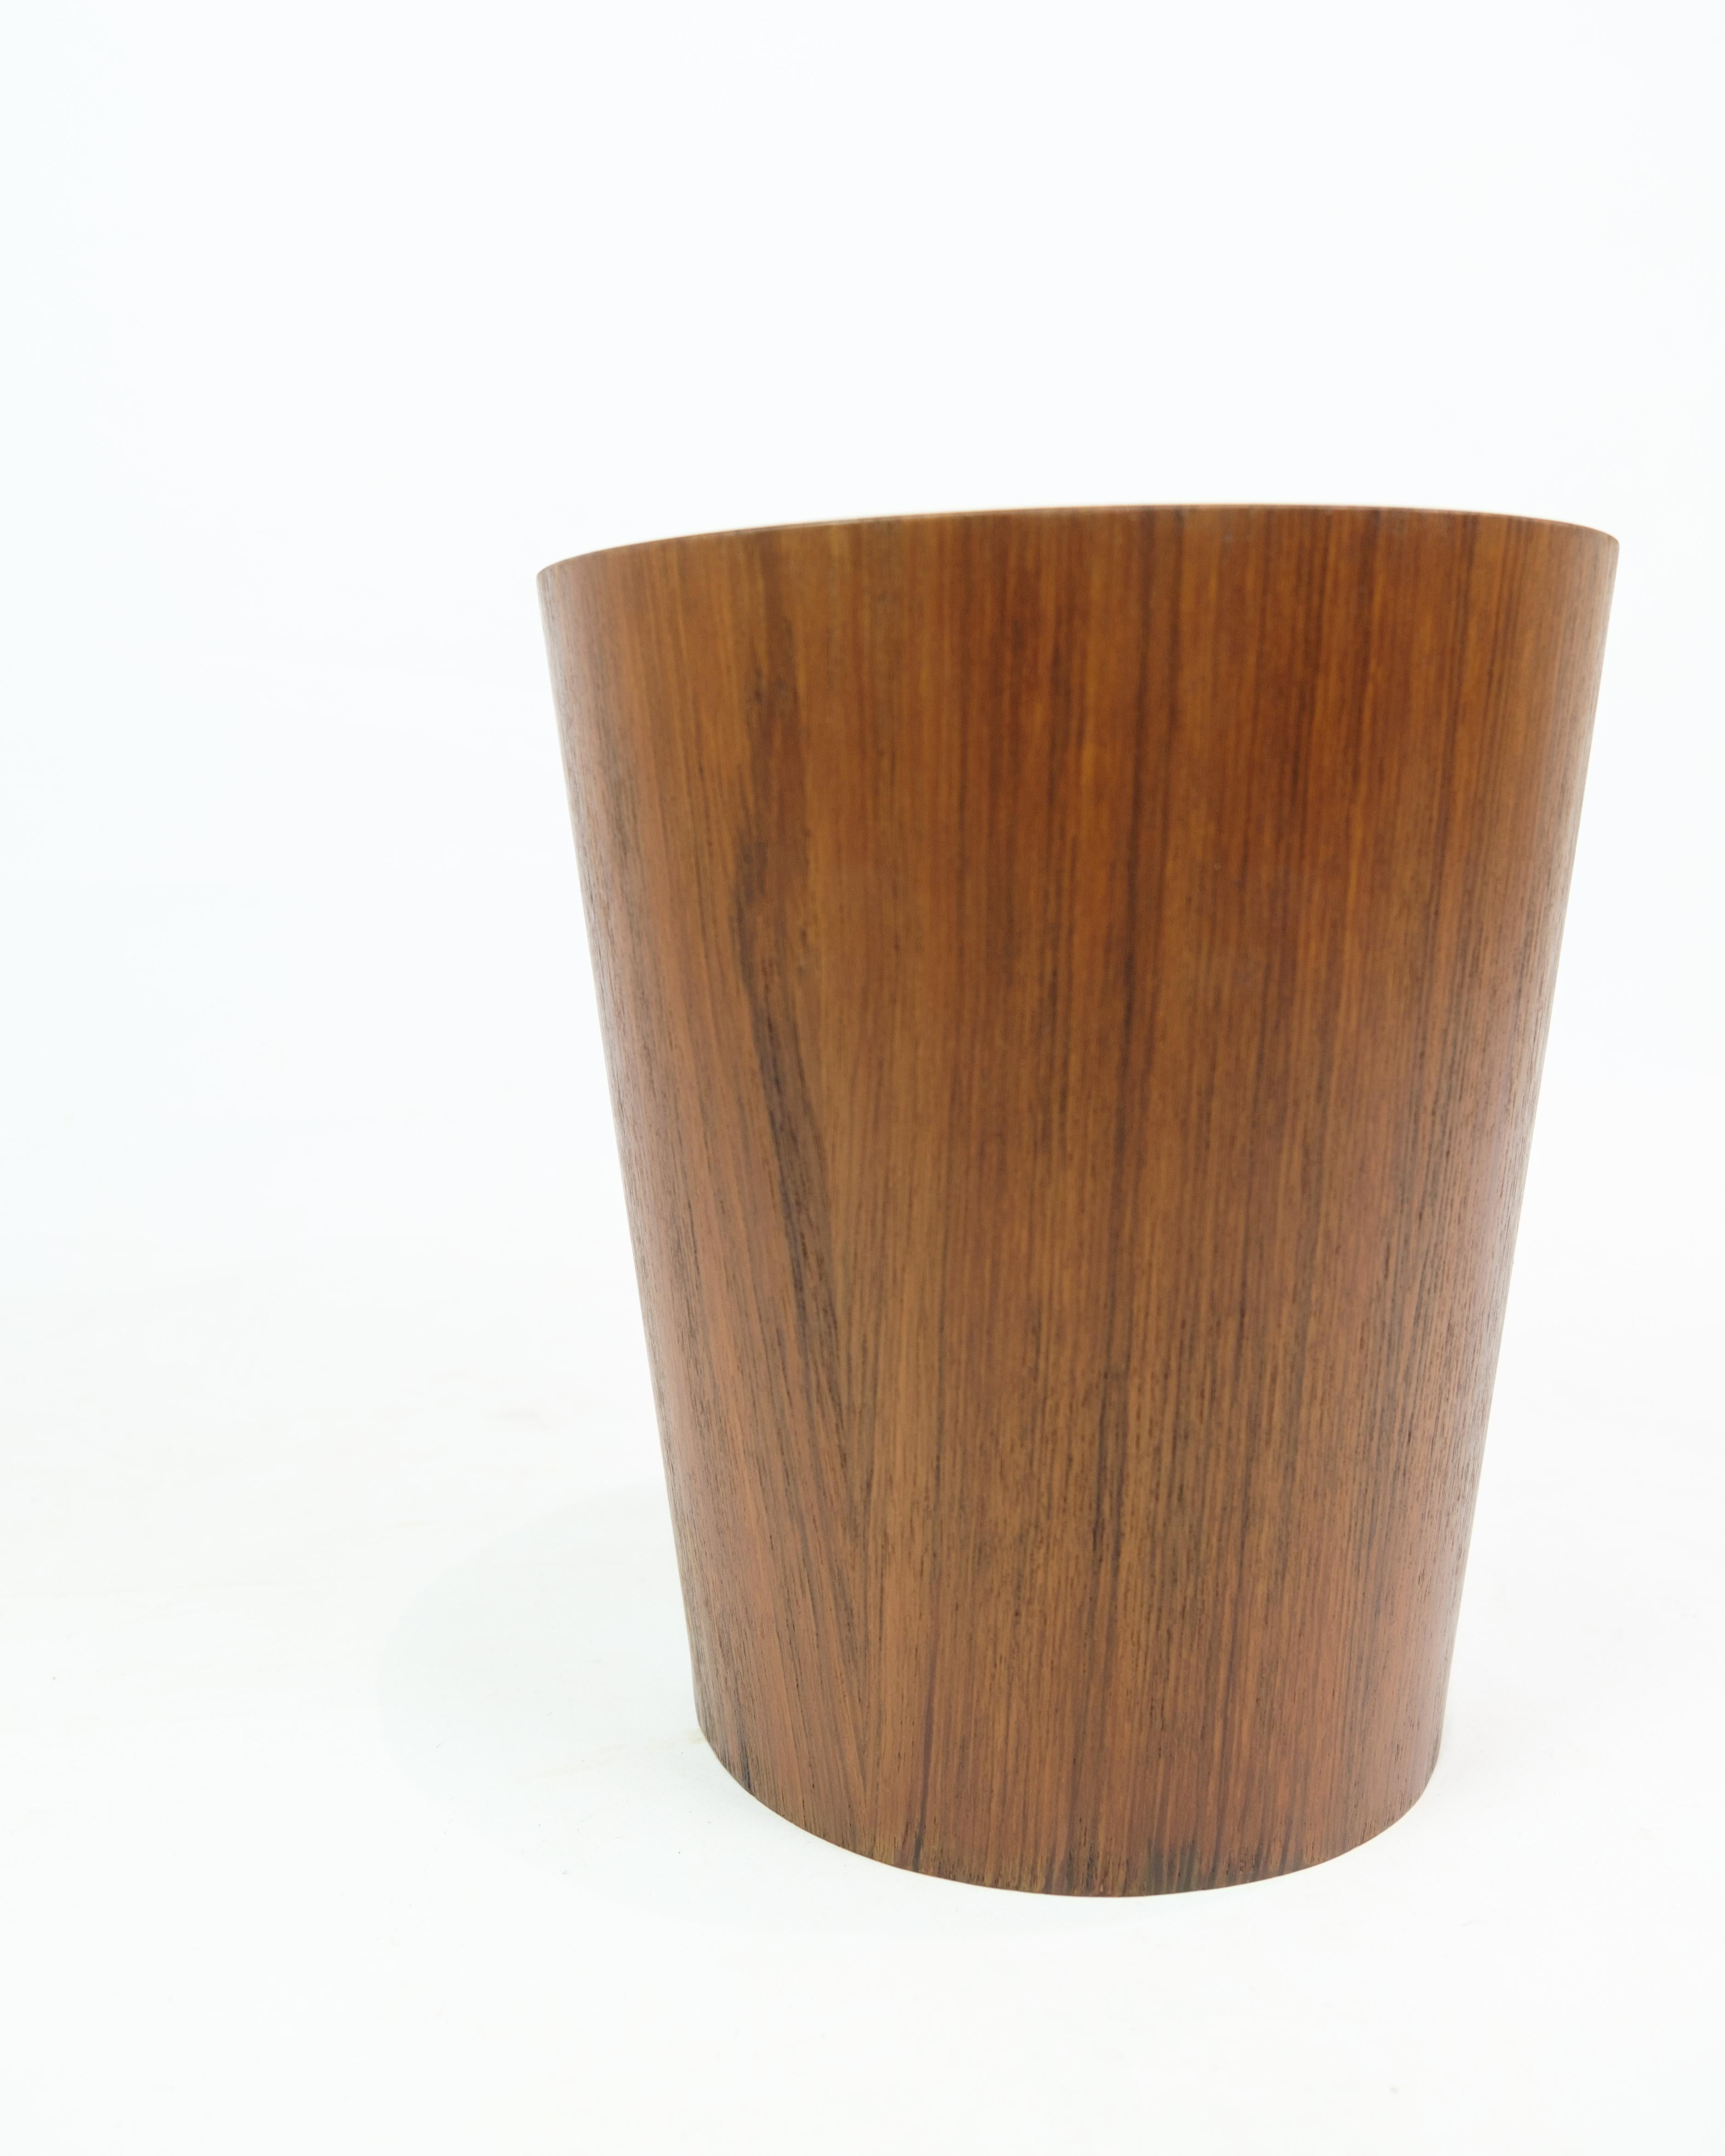 The teak waste bin of Swedish design from Servex, produced around the 1960s, represents a beautiful union of functionality and style within Scandinavian design. This wastebasket is an excellent example of the period's focus on simplicity and the use